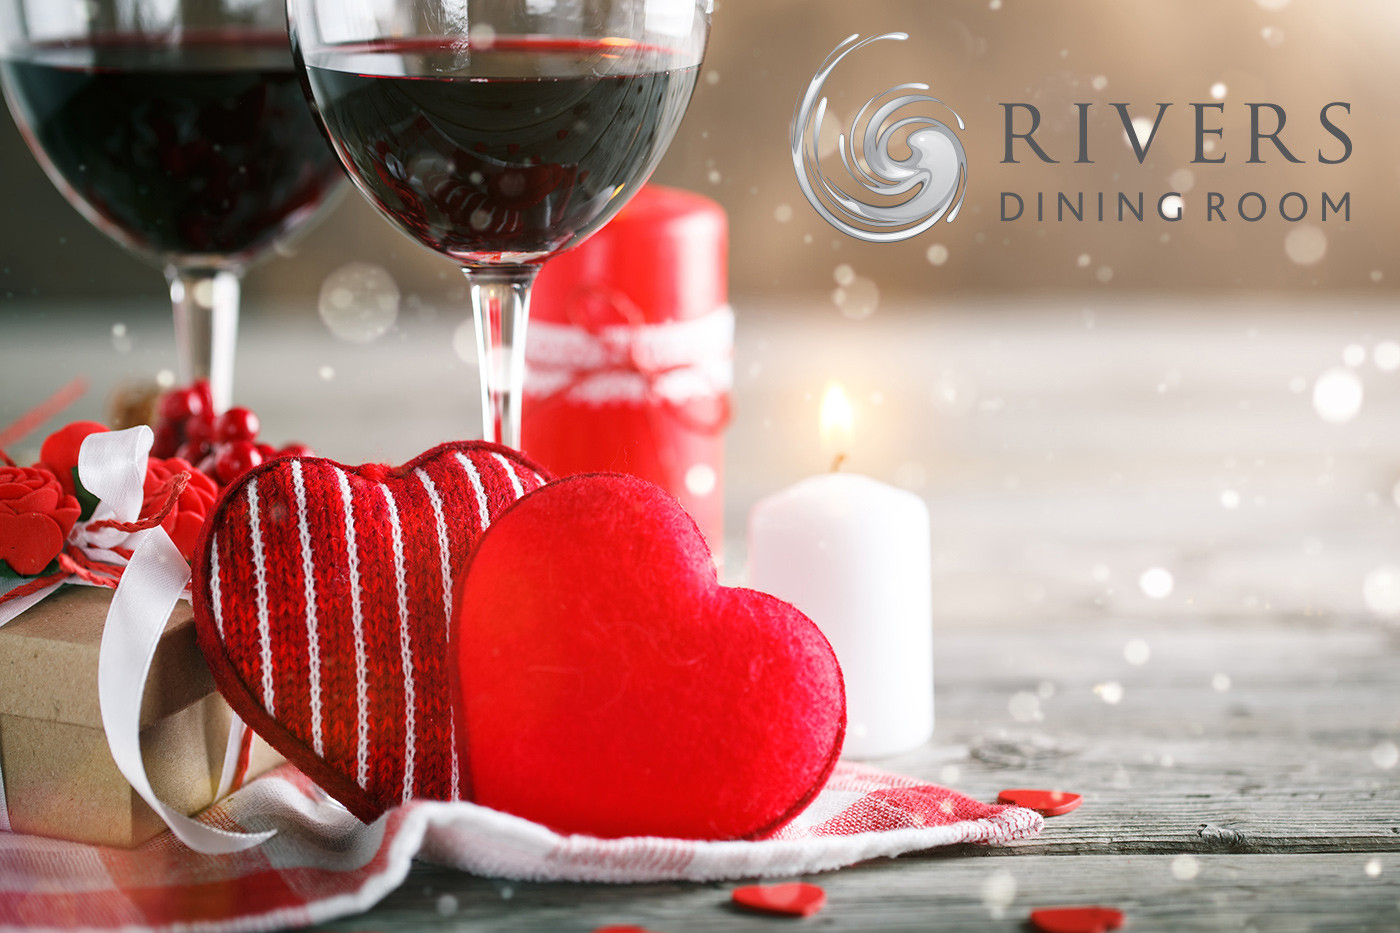 Valentines Day Dinner Restaurants
 Spice up your romance with a Valentine’s gourmet meal at